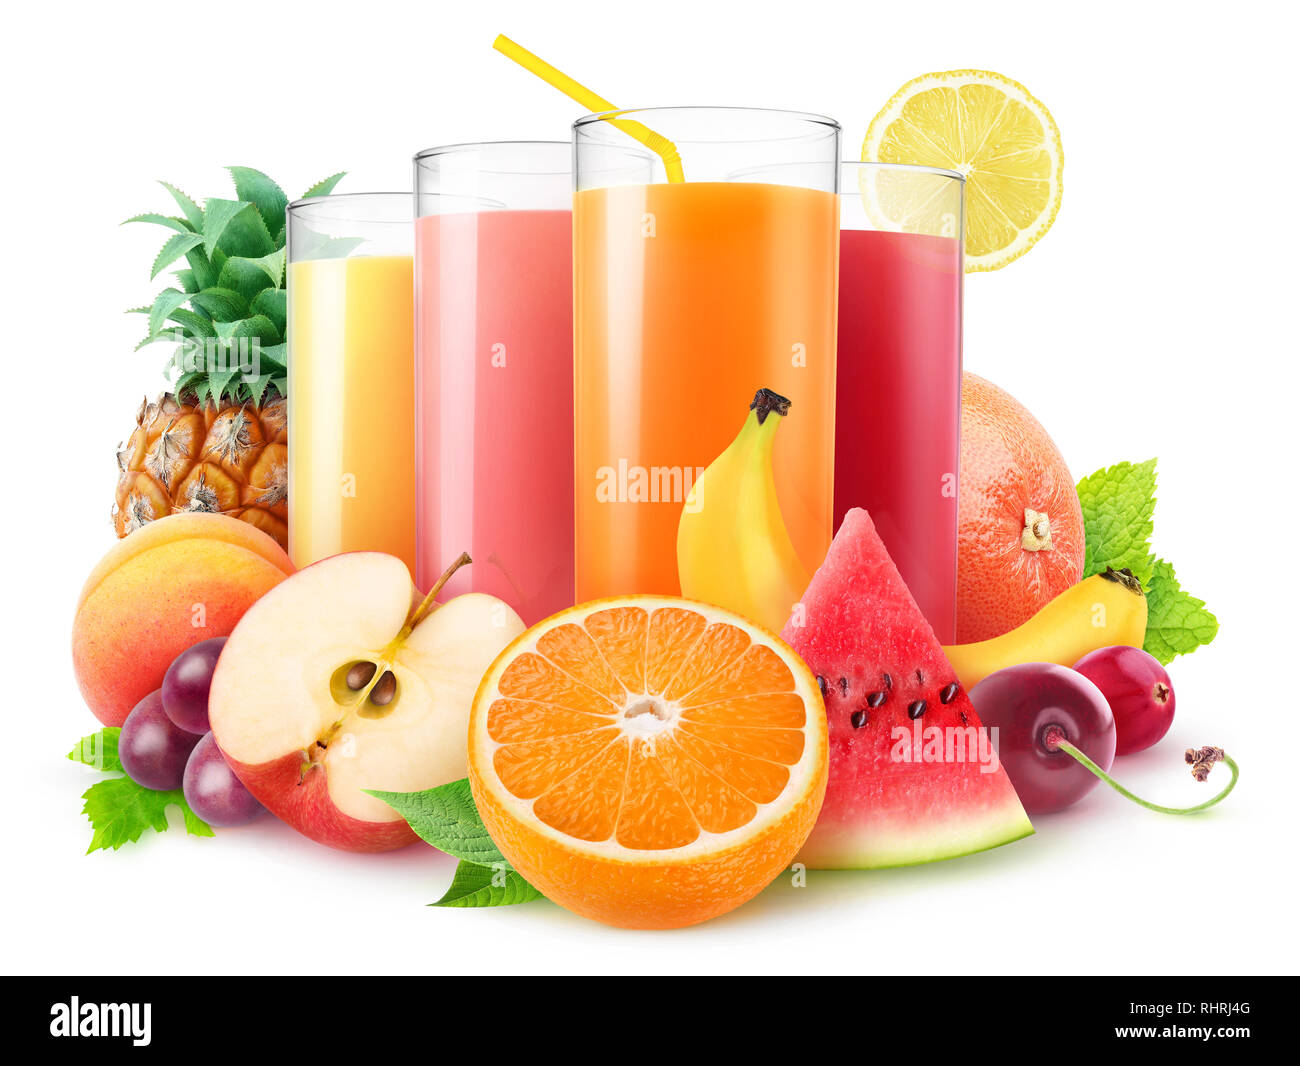 Isolated juices. Glasses of fresh juice and pile of fruits and berries isolated on white background with clipping path Stock Photo